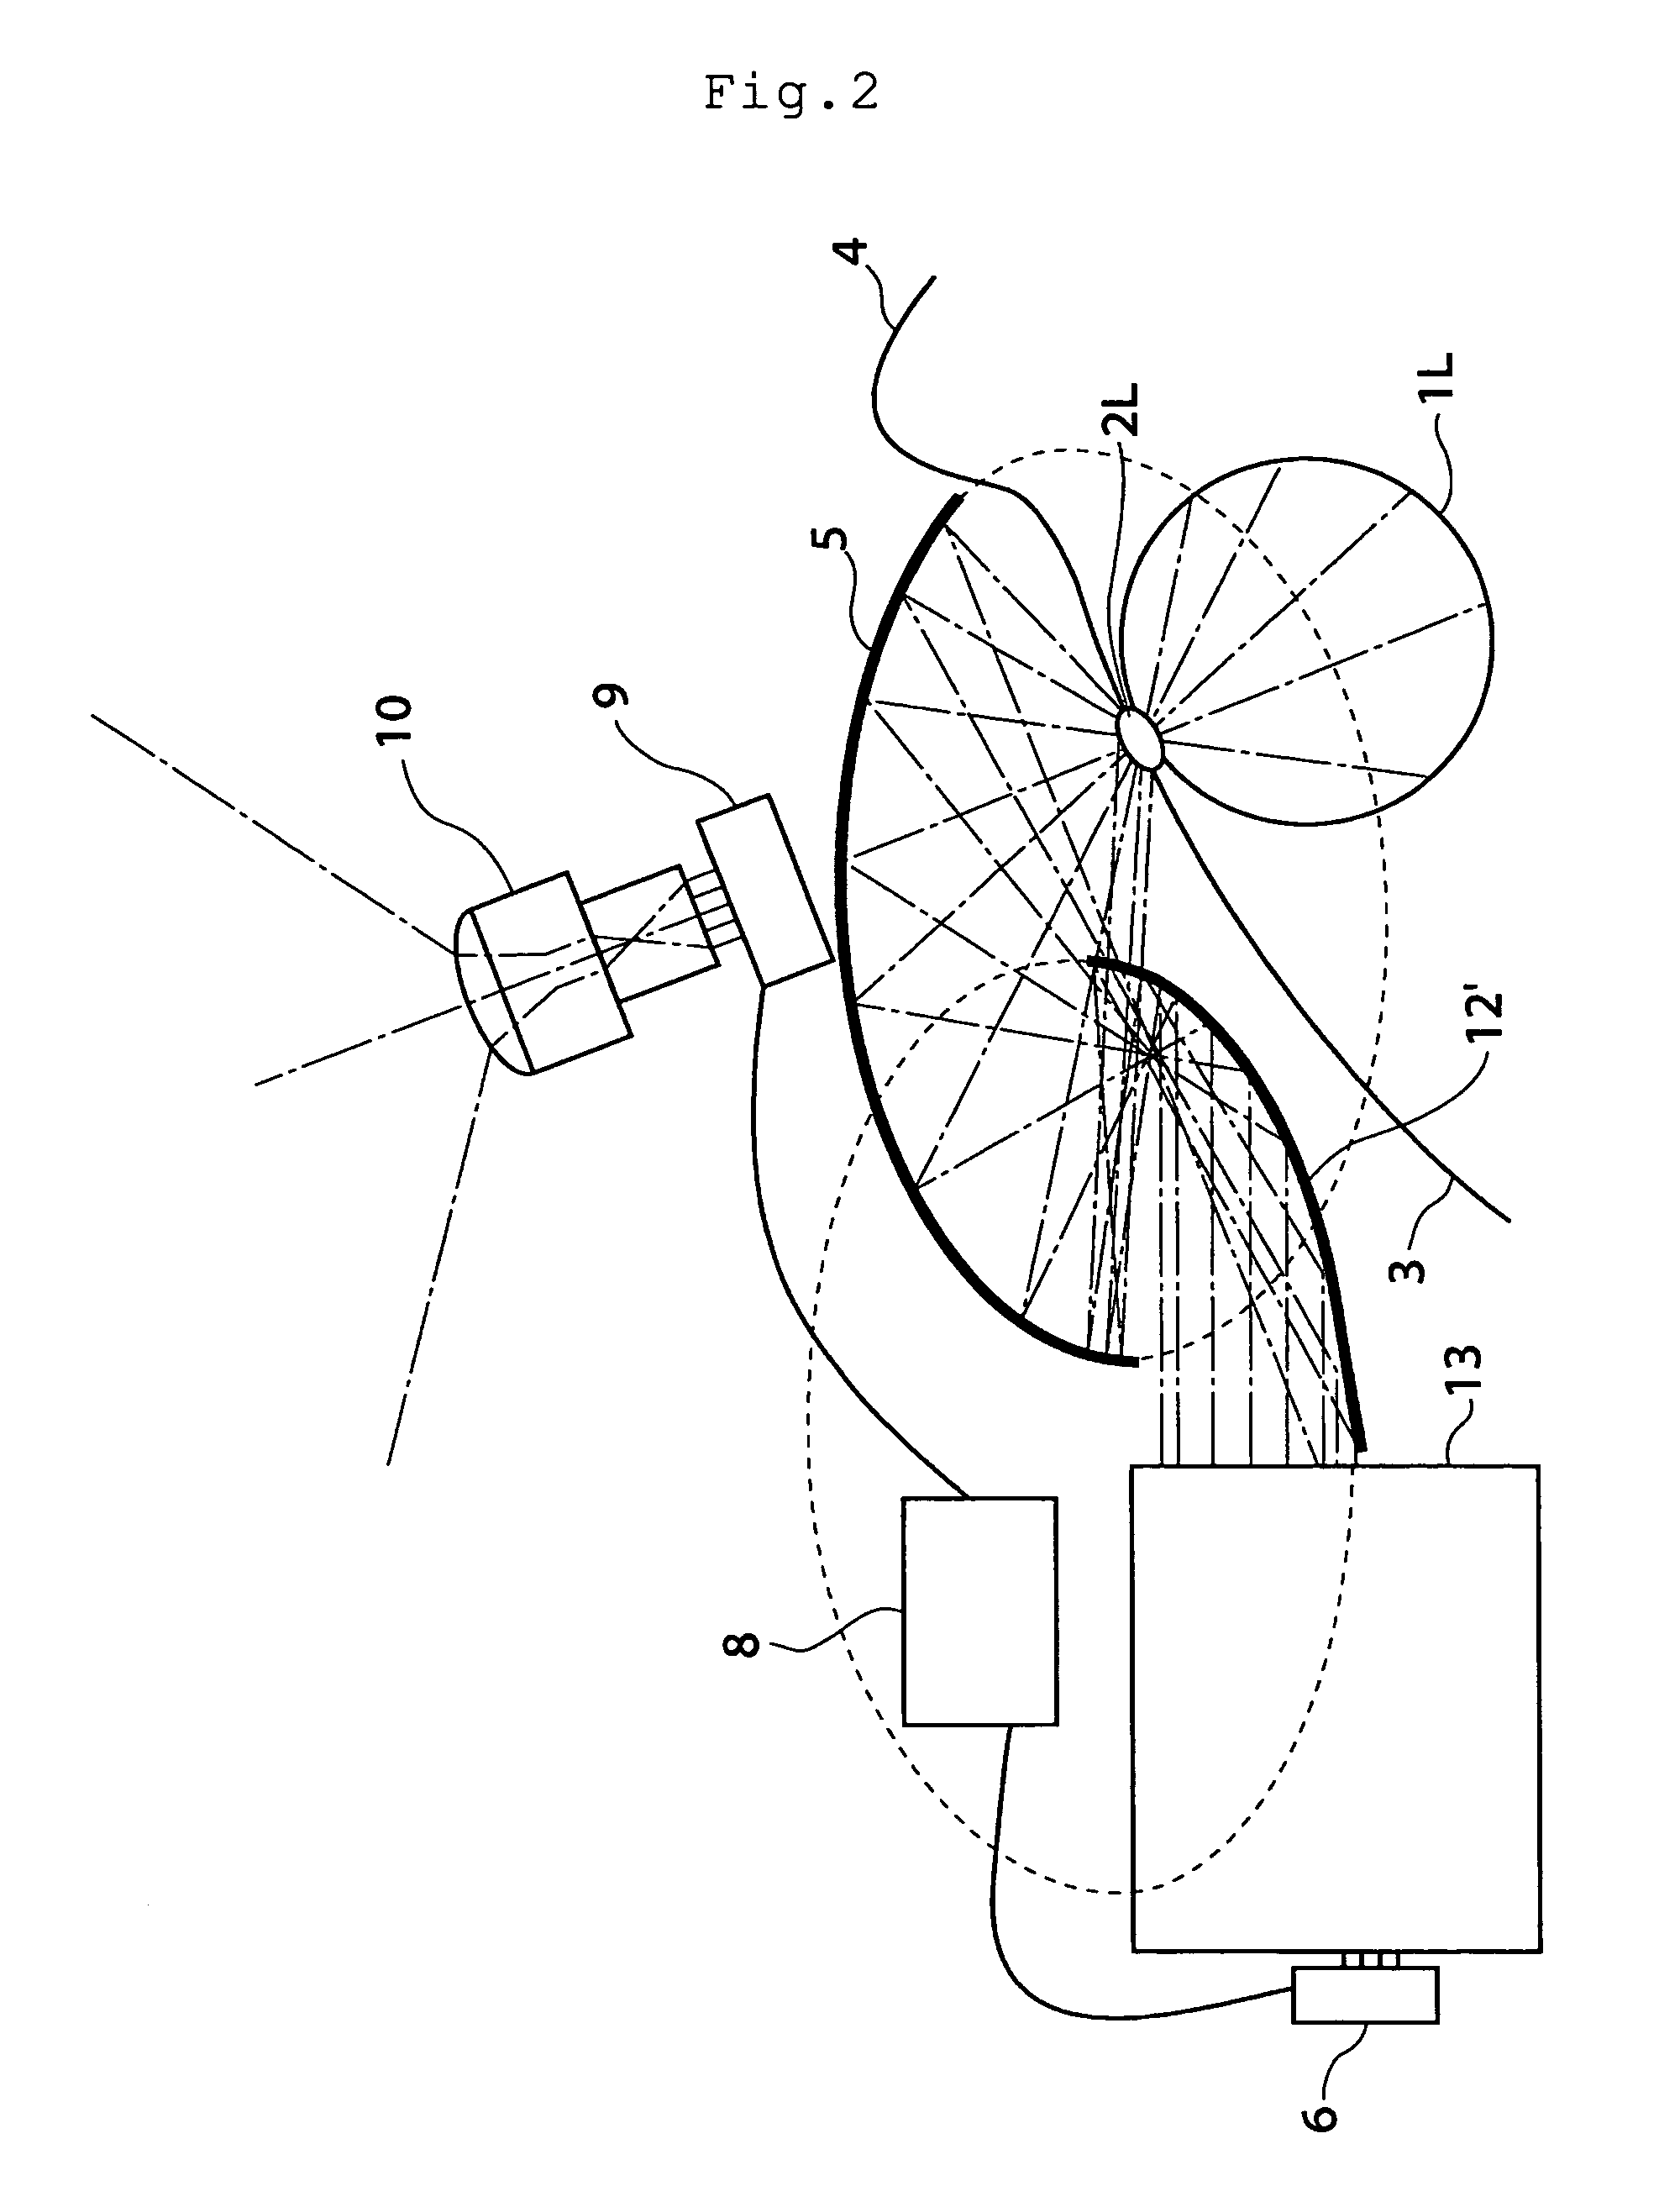 Image display unit and projection optical system